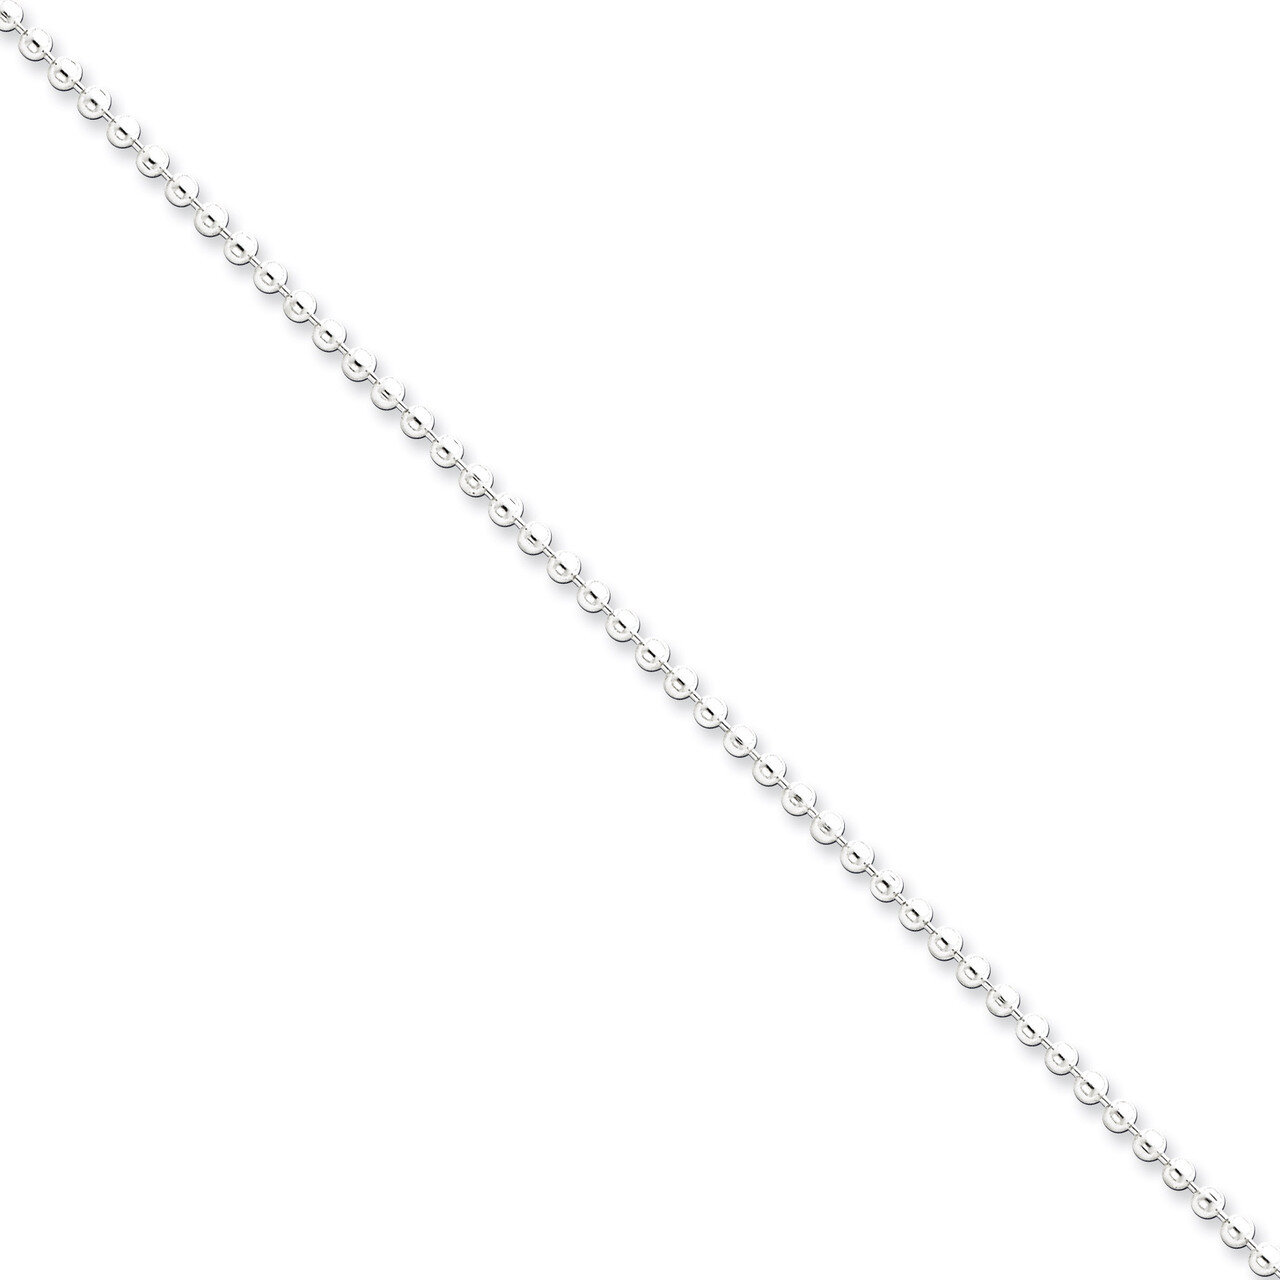 20 Inch 2.35mm Beaded Chain Sterling Silver QK82-20